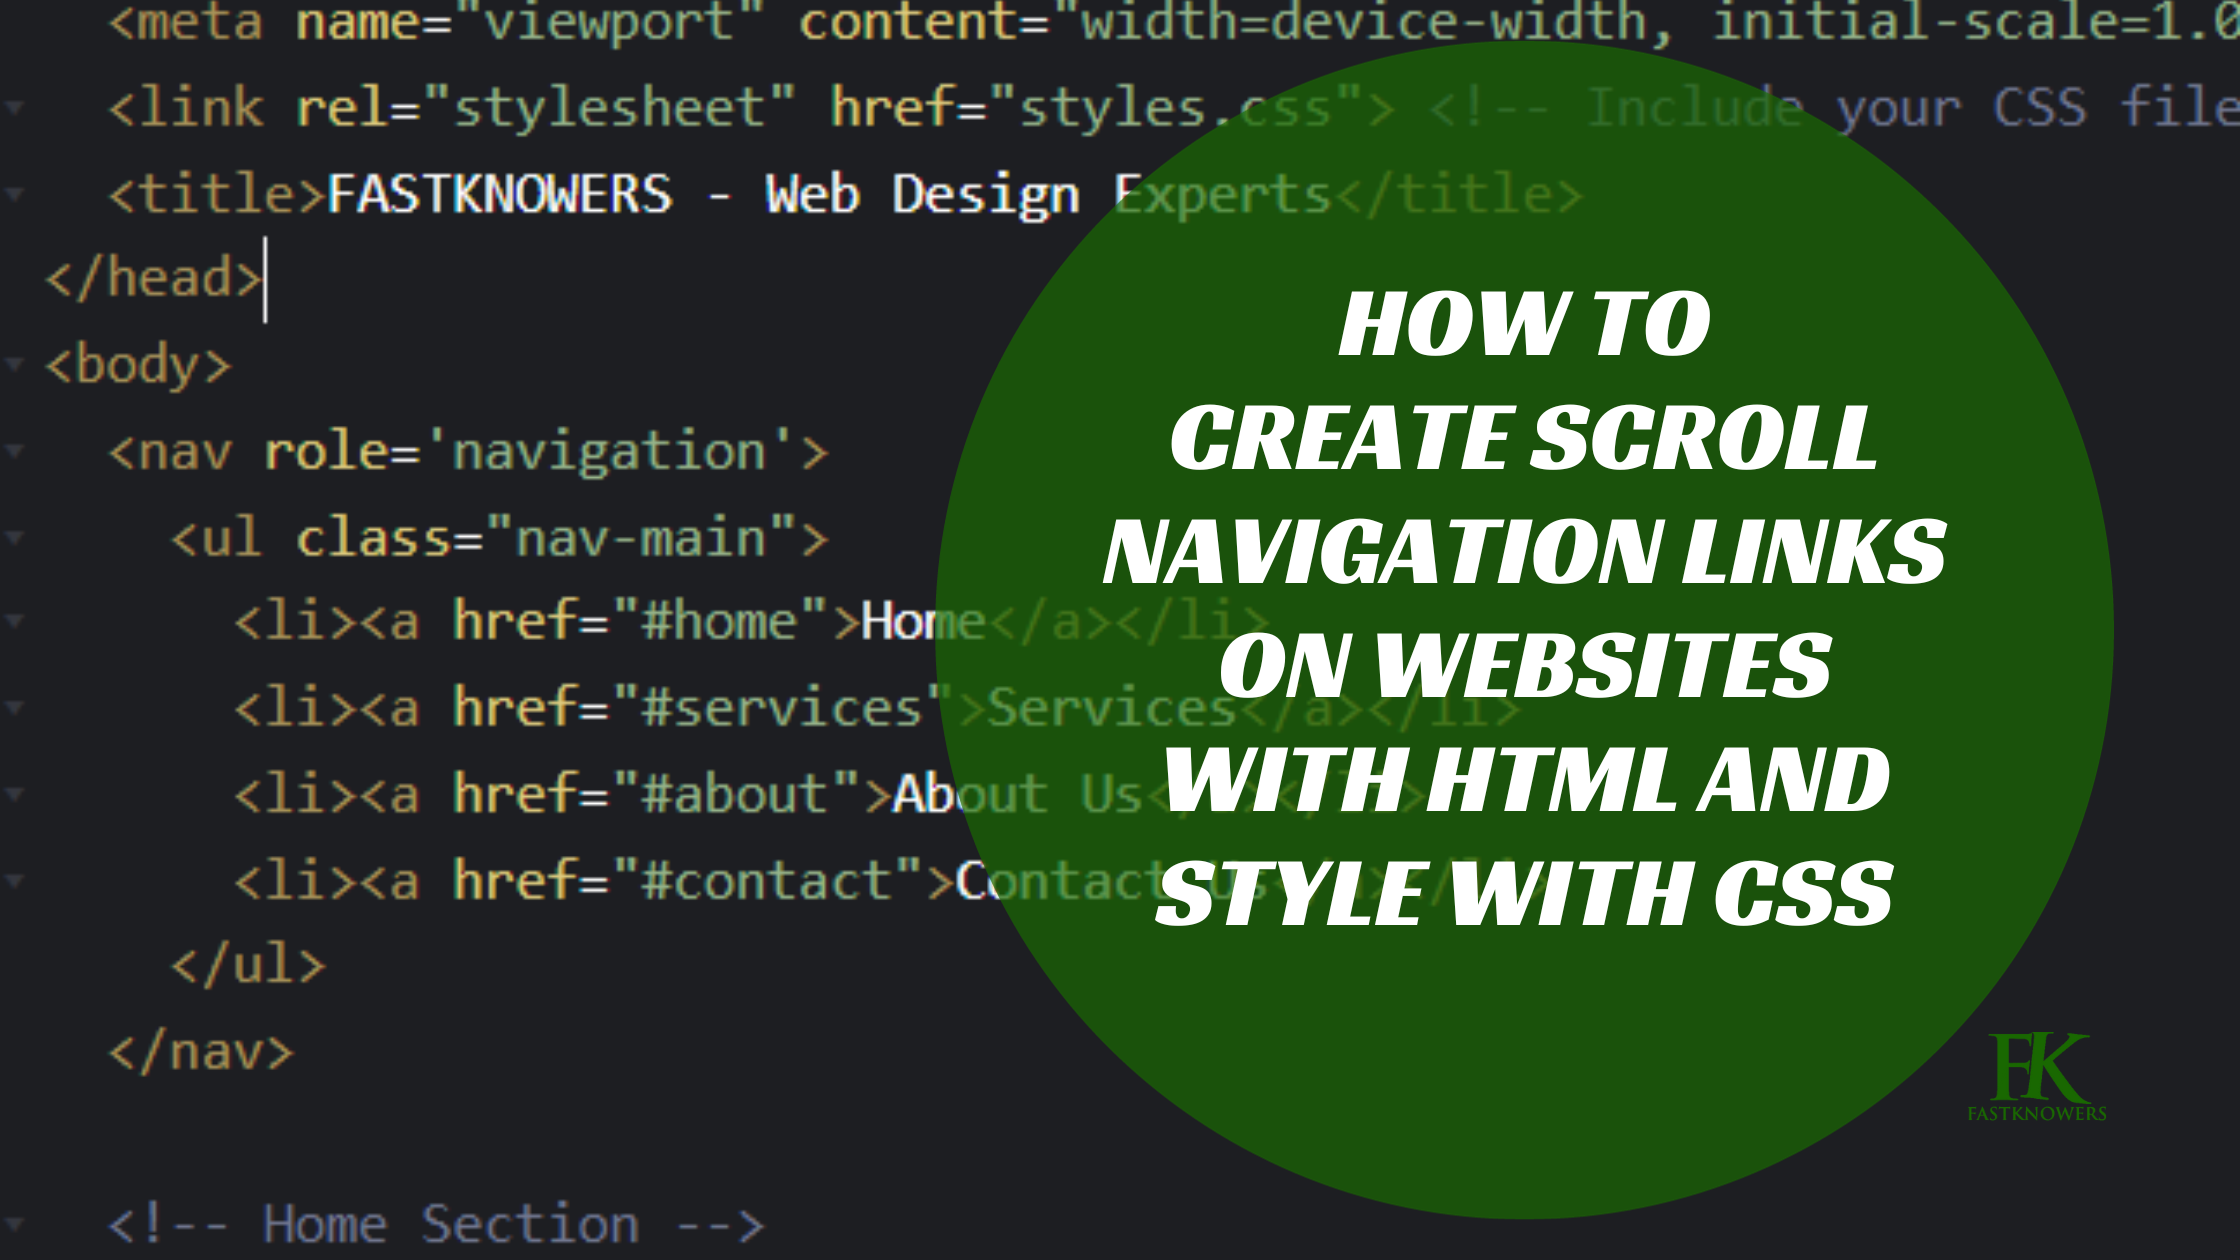 Step-by-step guides on how to add scroll navigation links on a website using HTML and CSS in conjunction with # and id attribute.